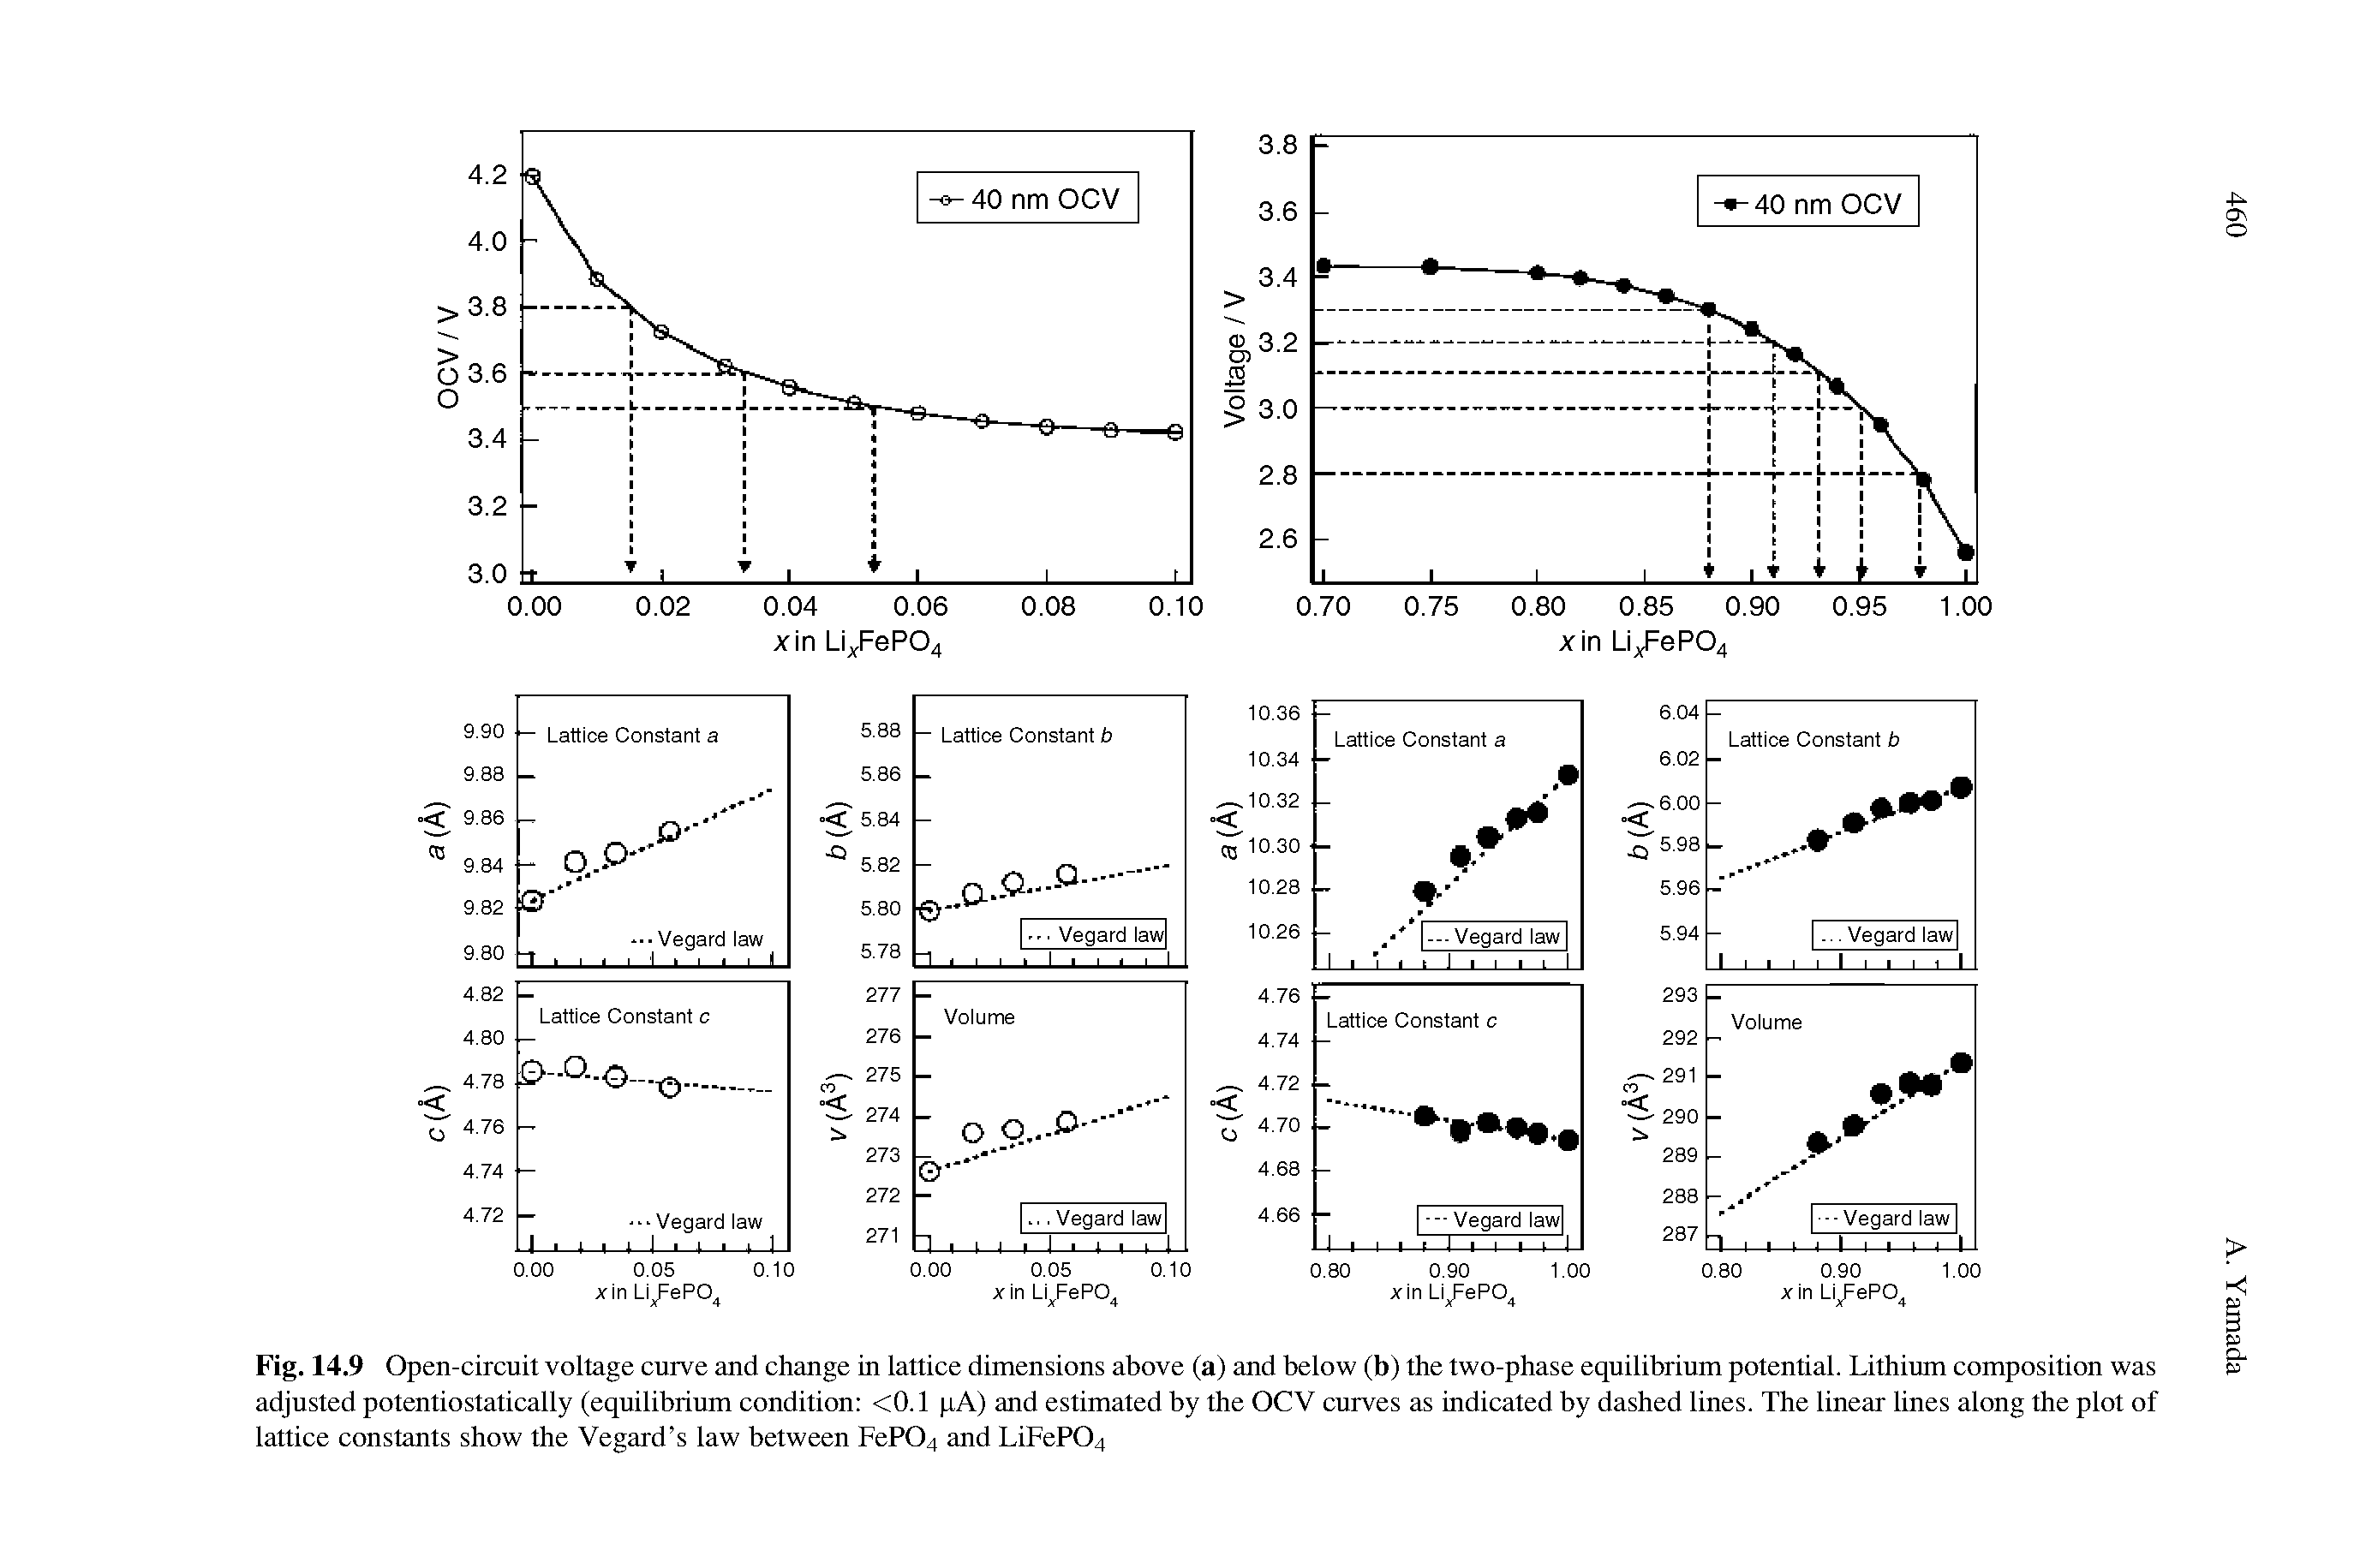 Fig. 14.9 Open-circuit voltage curve and change in lattice dimensions above (a) and below (b) the two-phase equilibrium potential. Lithium composition was adjusted potentiostatically (equilibrium condition <0.1 pA) and estimated by the OCV curves as indicated by dashed lines. The linear lines along the plot of lattice constants show the "Vegard s law between FeP04 and LiFeP04...